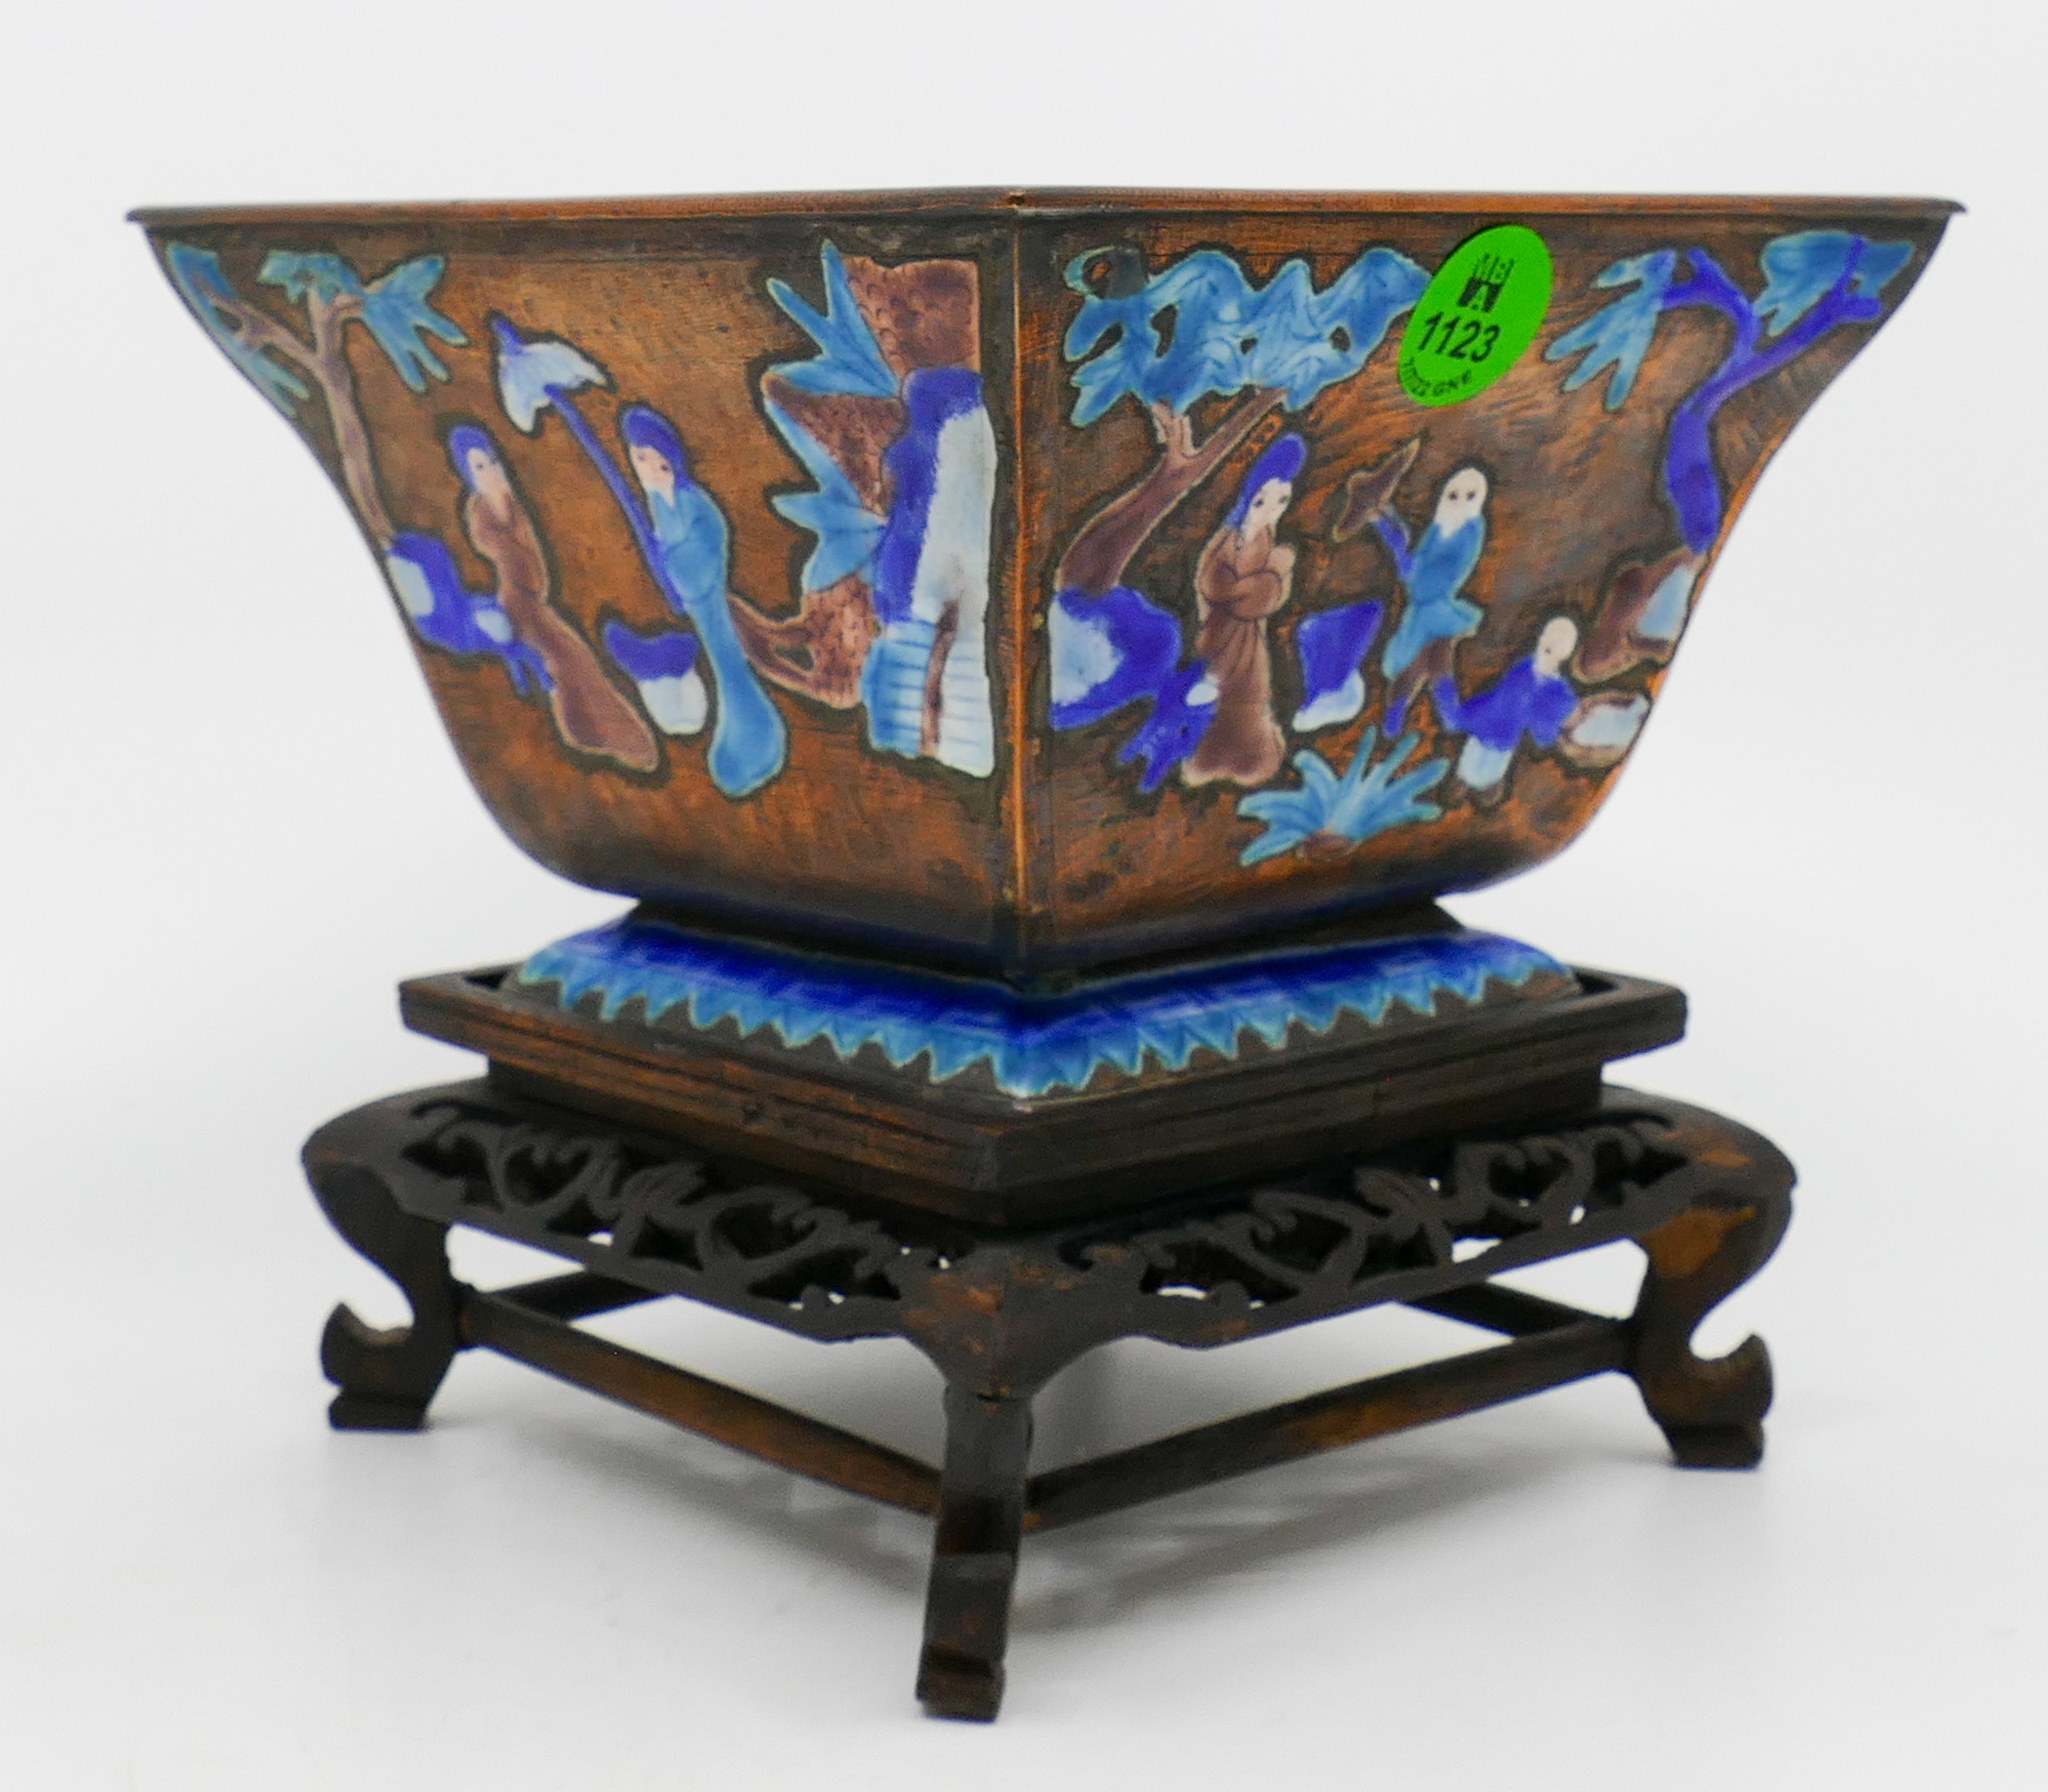 Old Chinese Enameled Copper Bowl